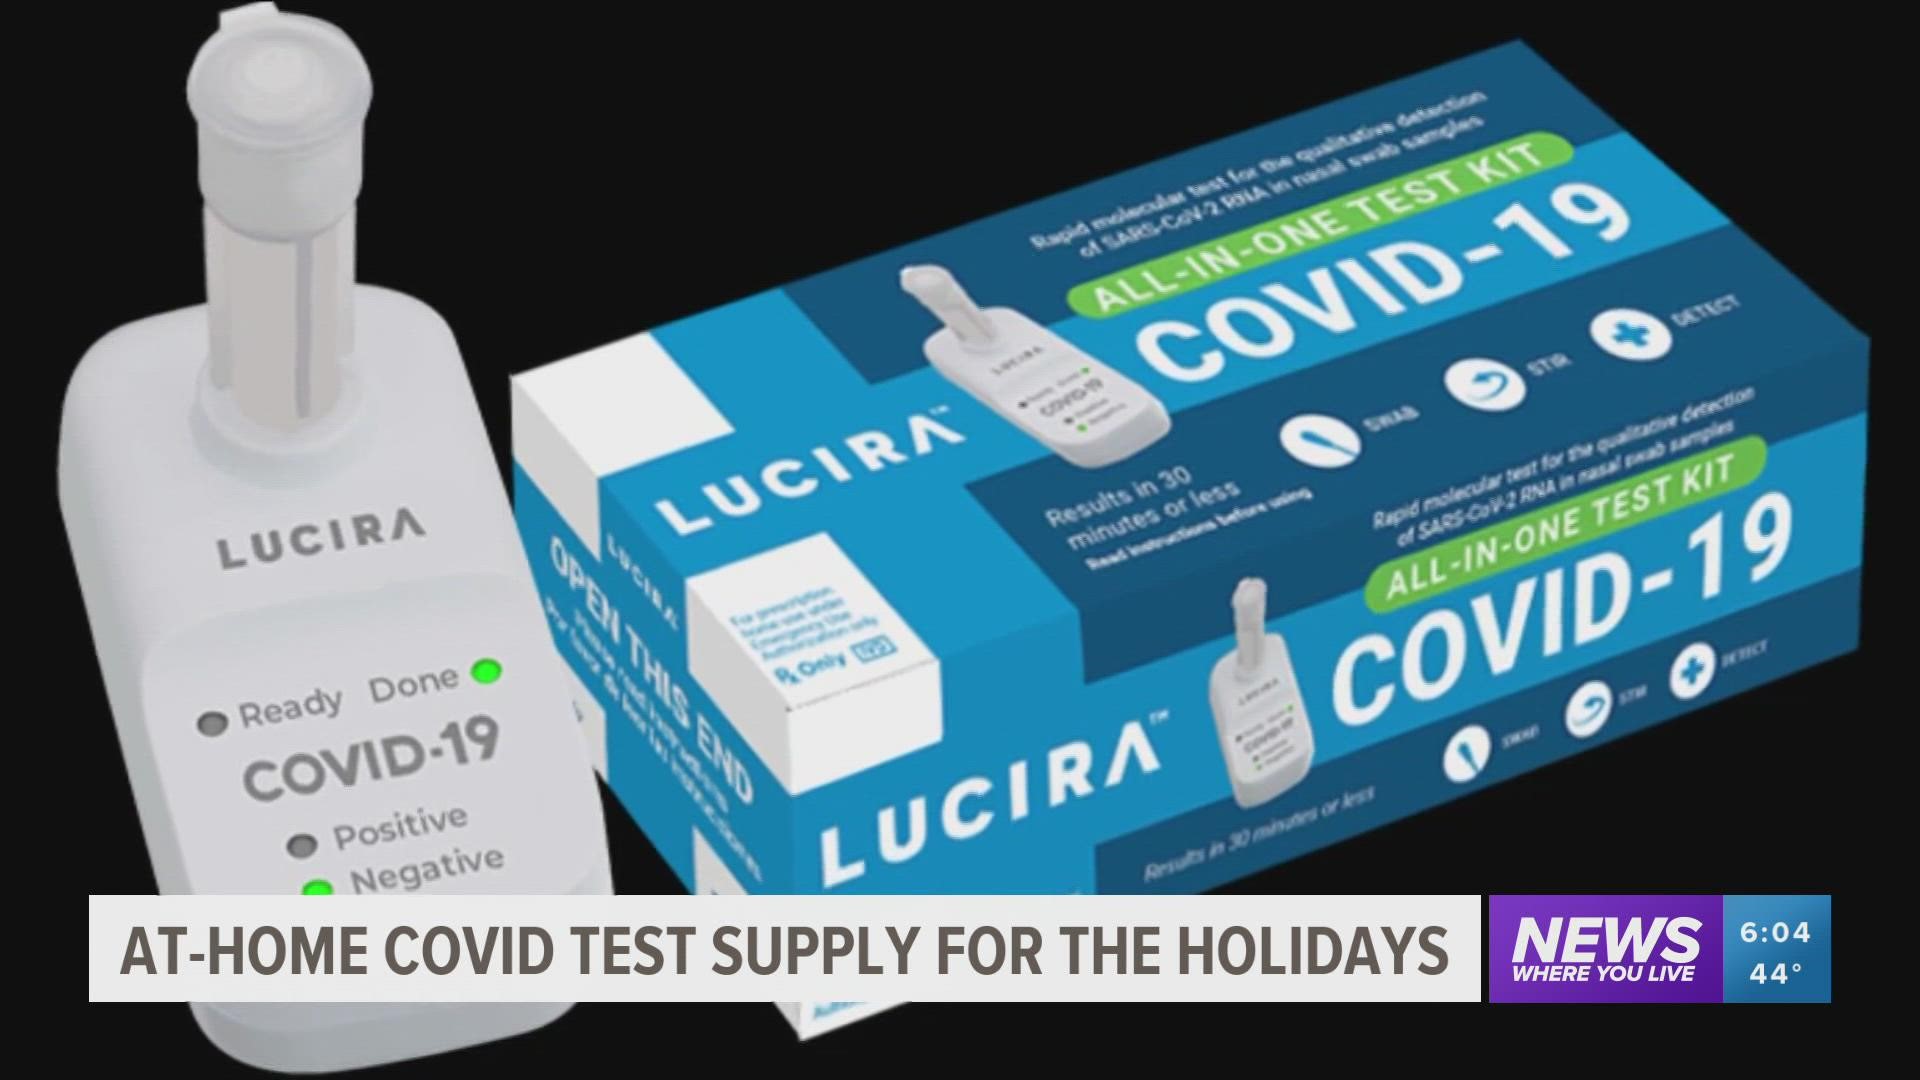 One company that makes the tests says the rapid antigen tests are in high demand.